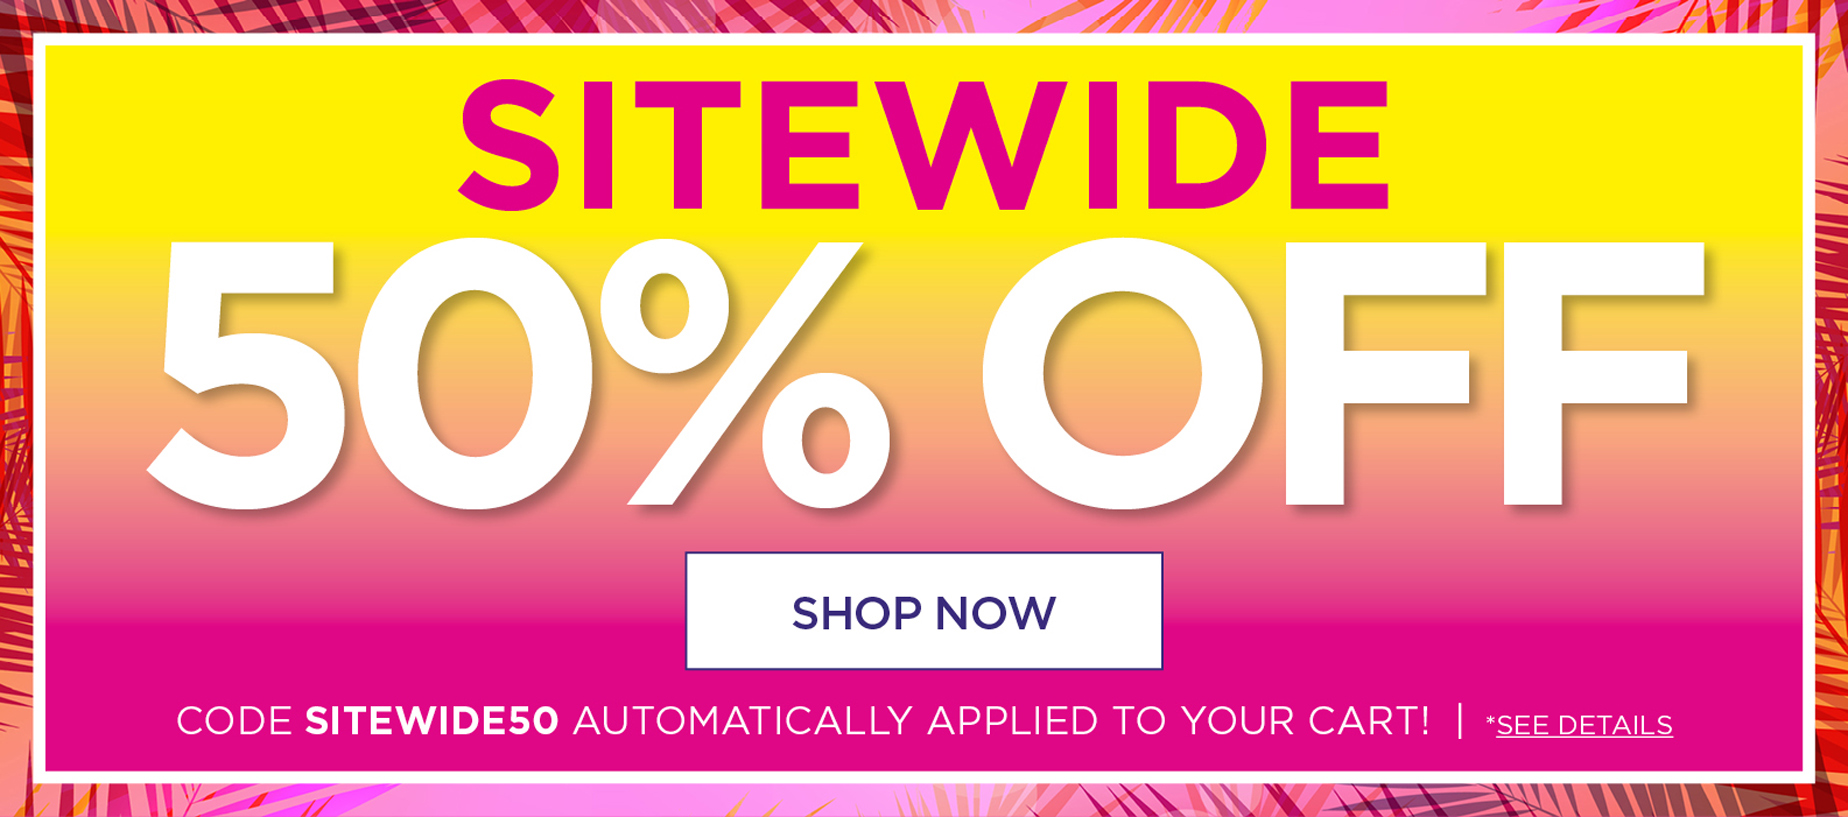 SITEWIDE SALE 50% OFF with code SITEWIDE50